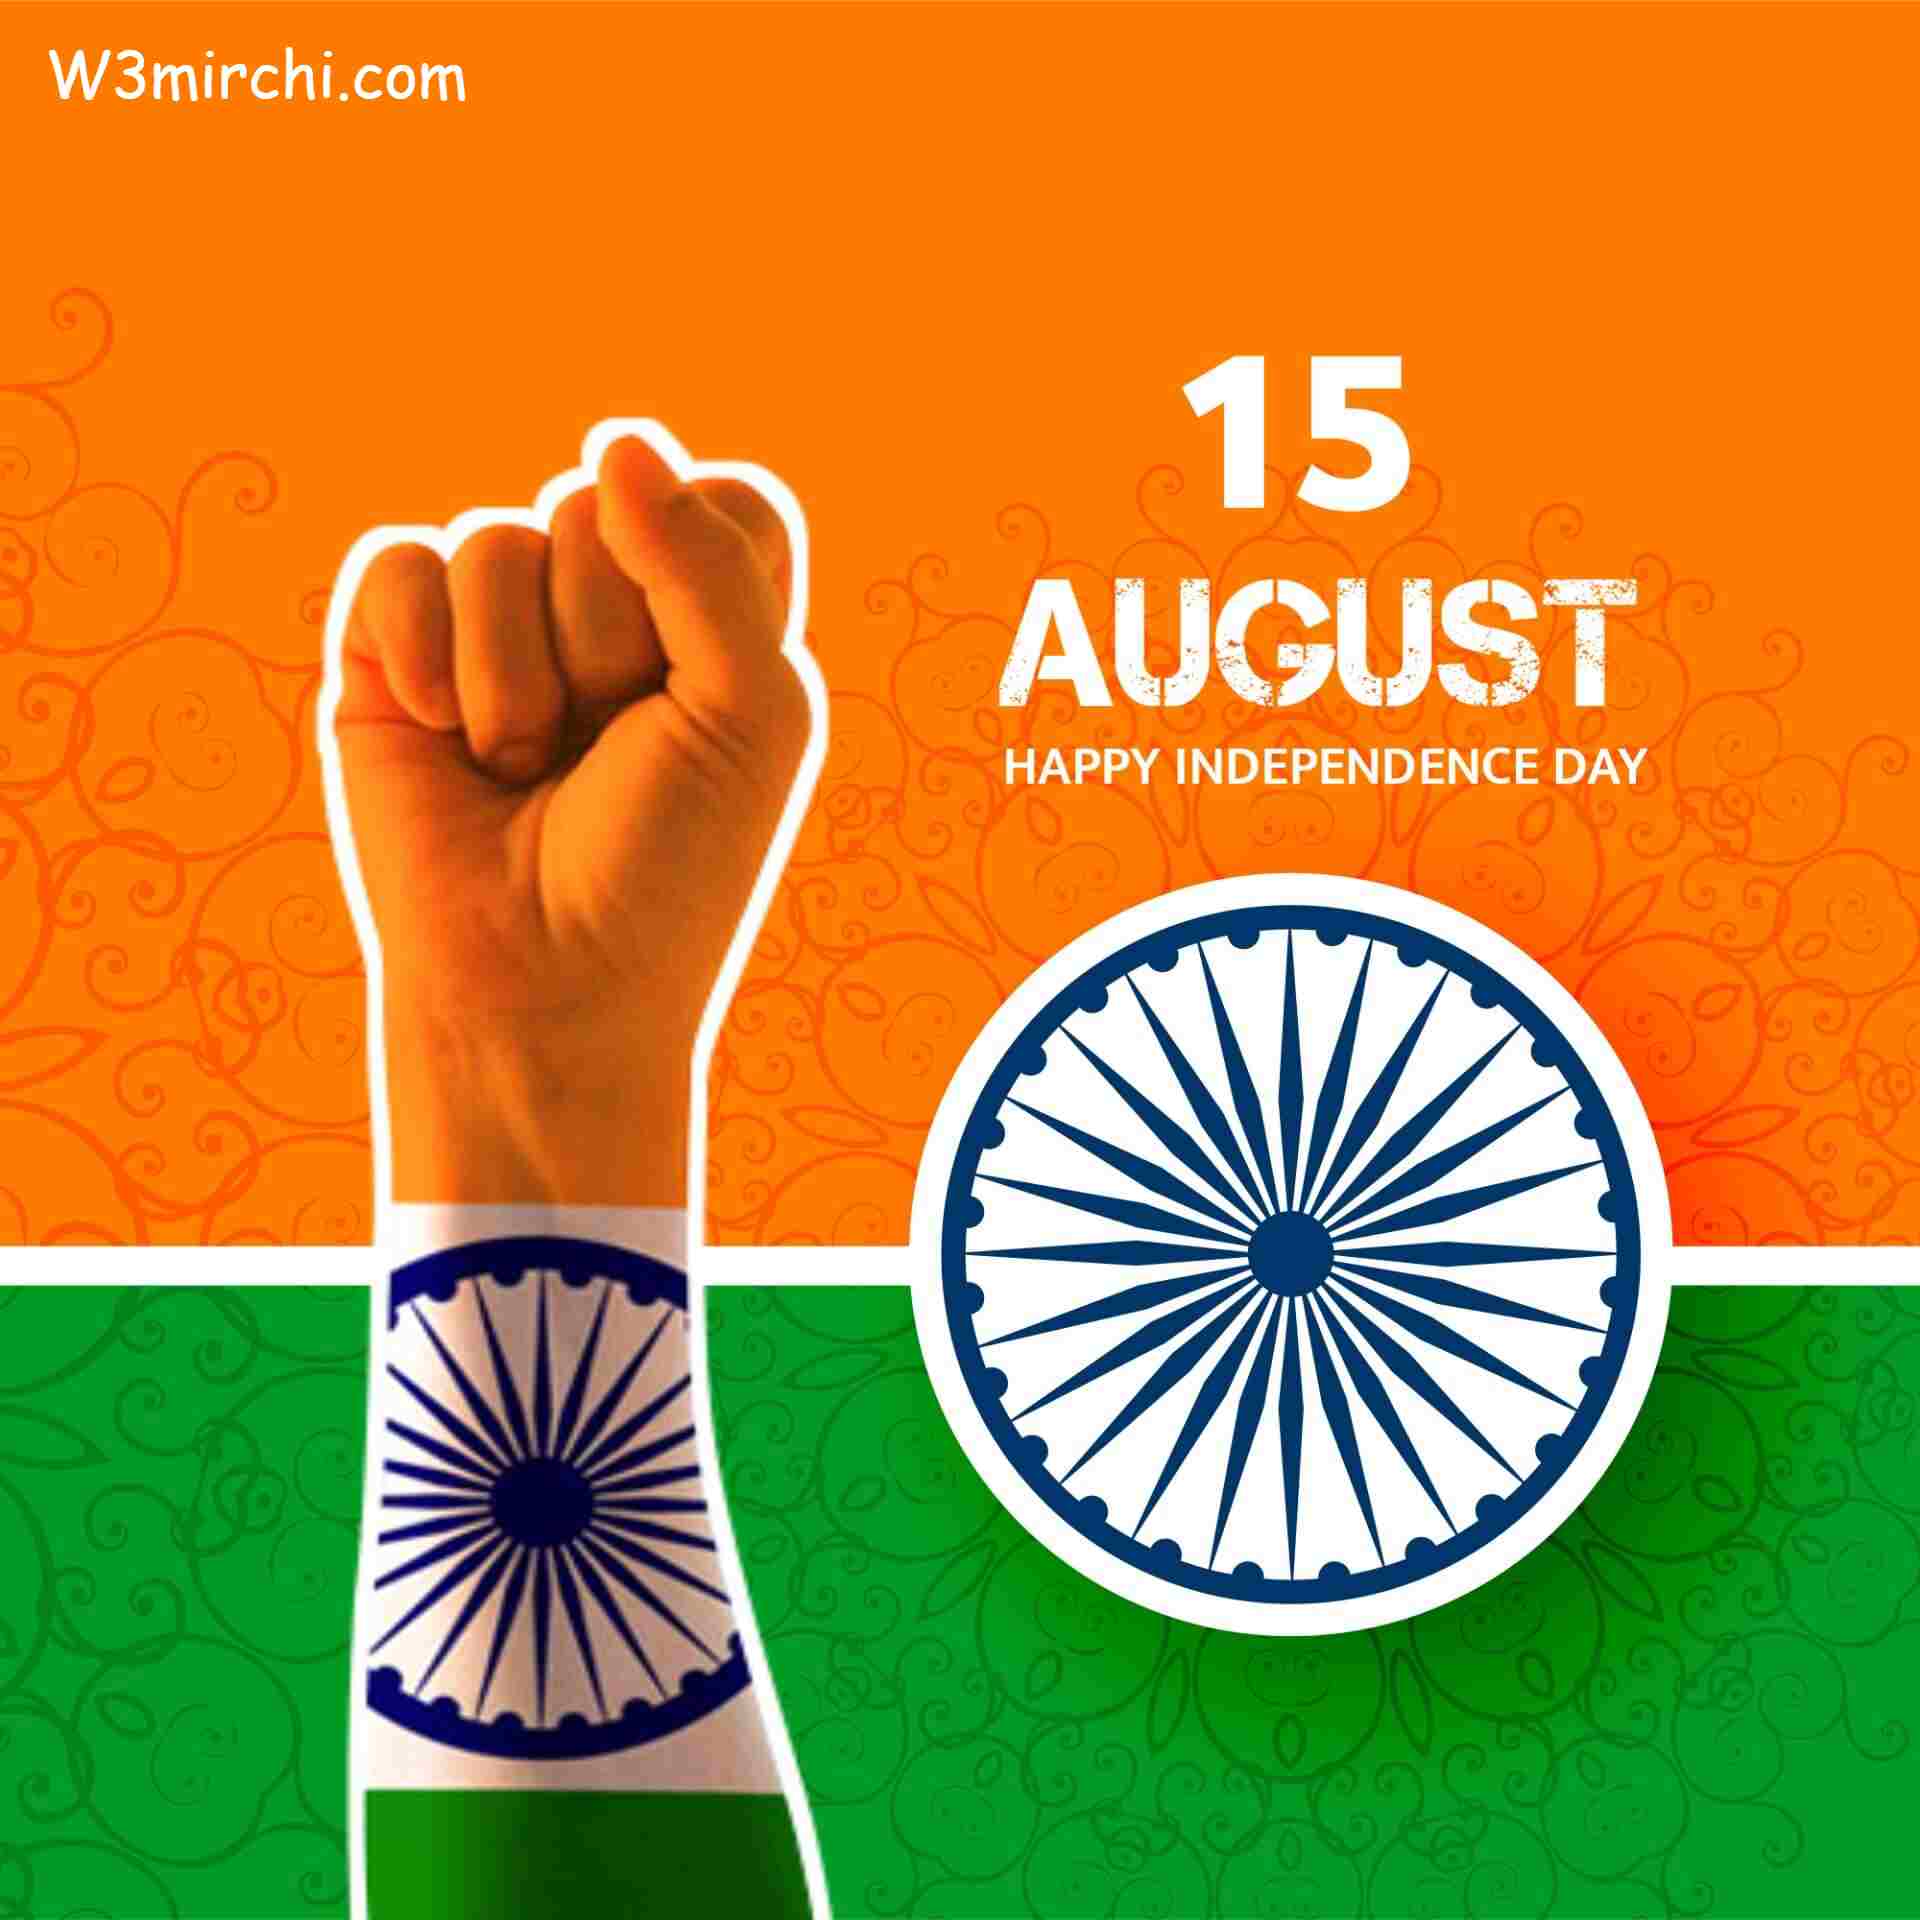 Happy Independence Day